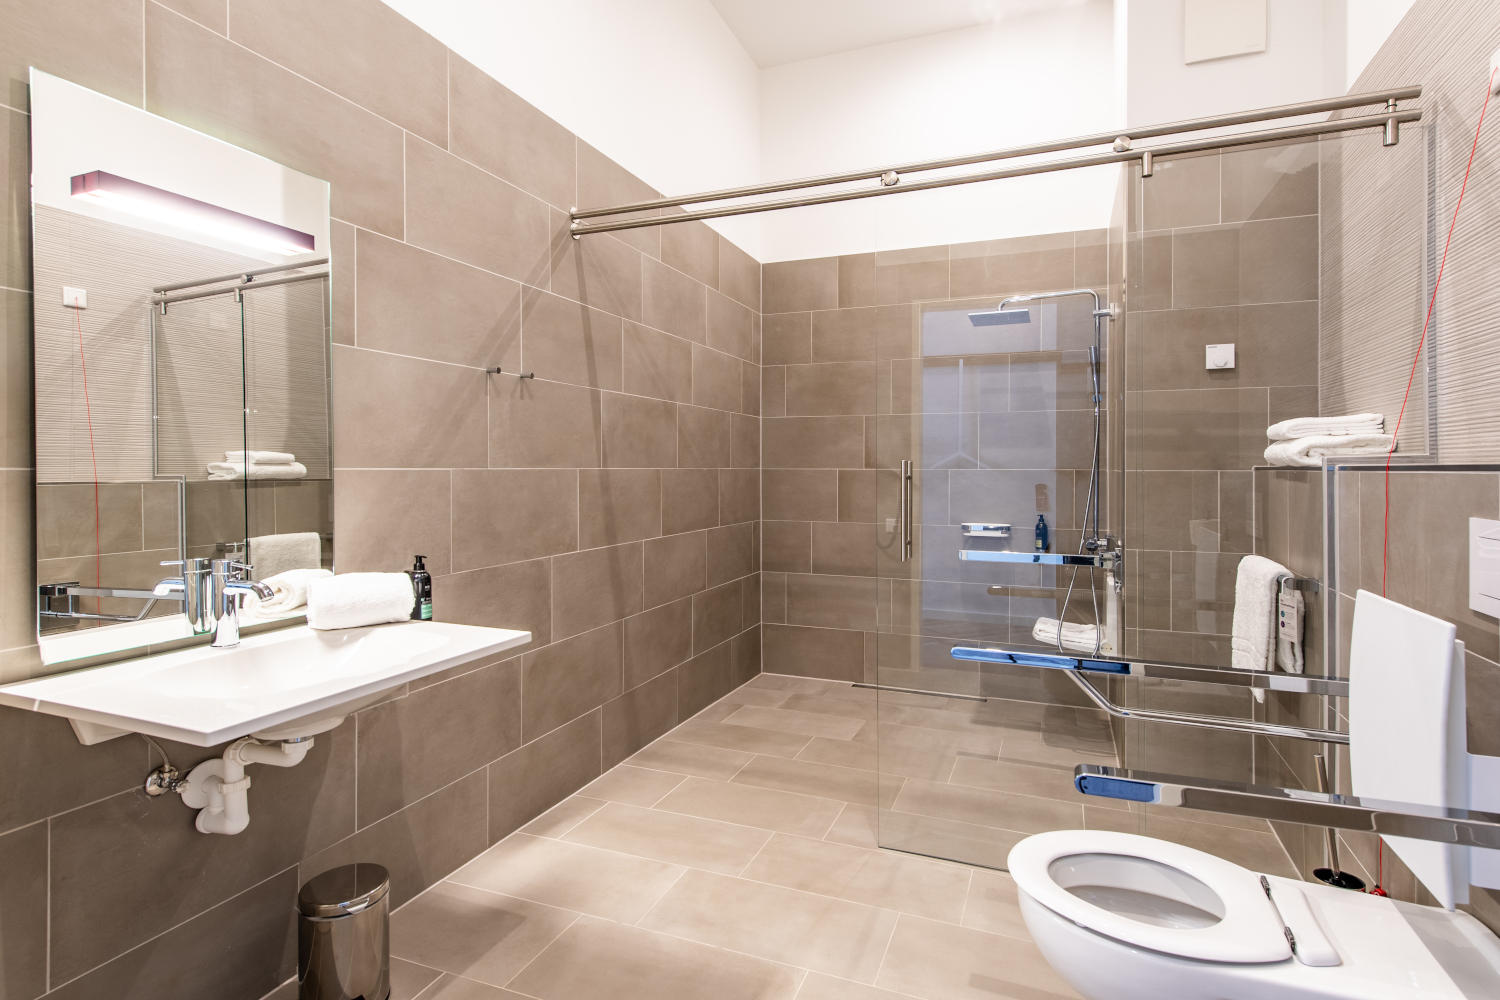 Premier Inn Wuppertal City Centre accessible wet room with walk in shower